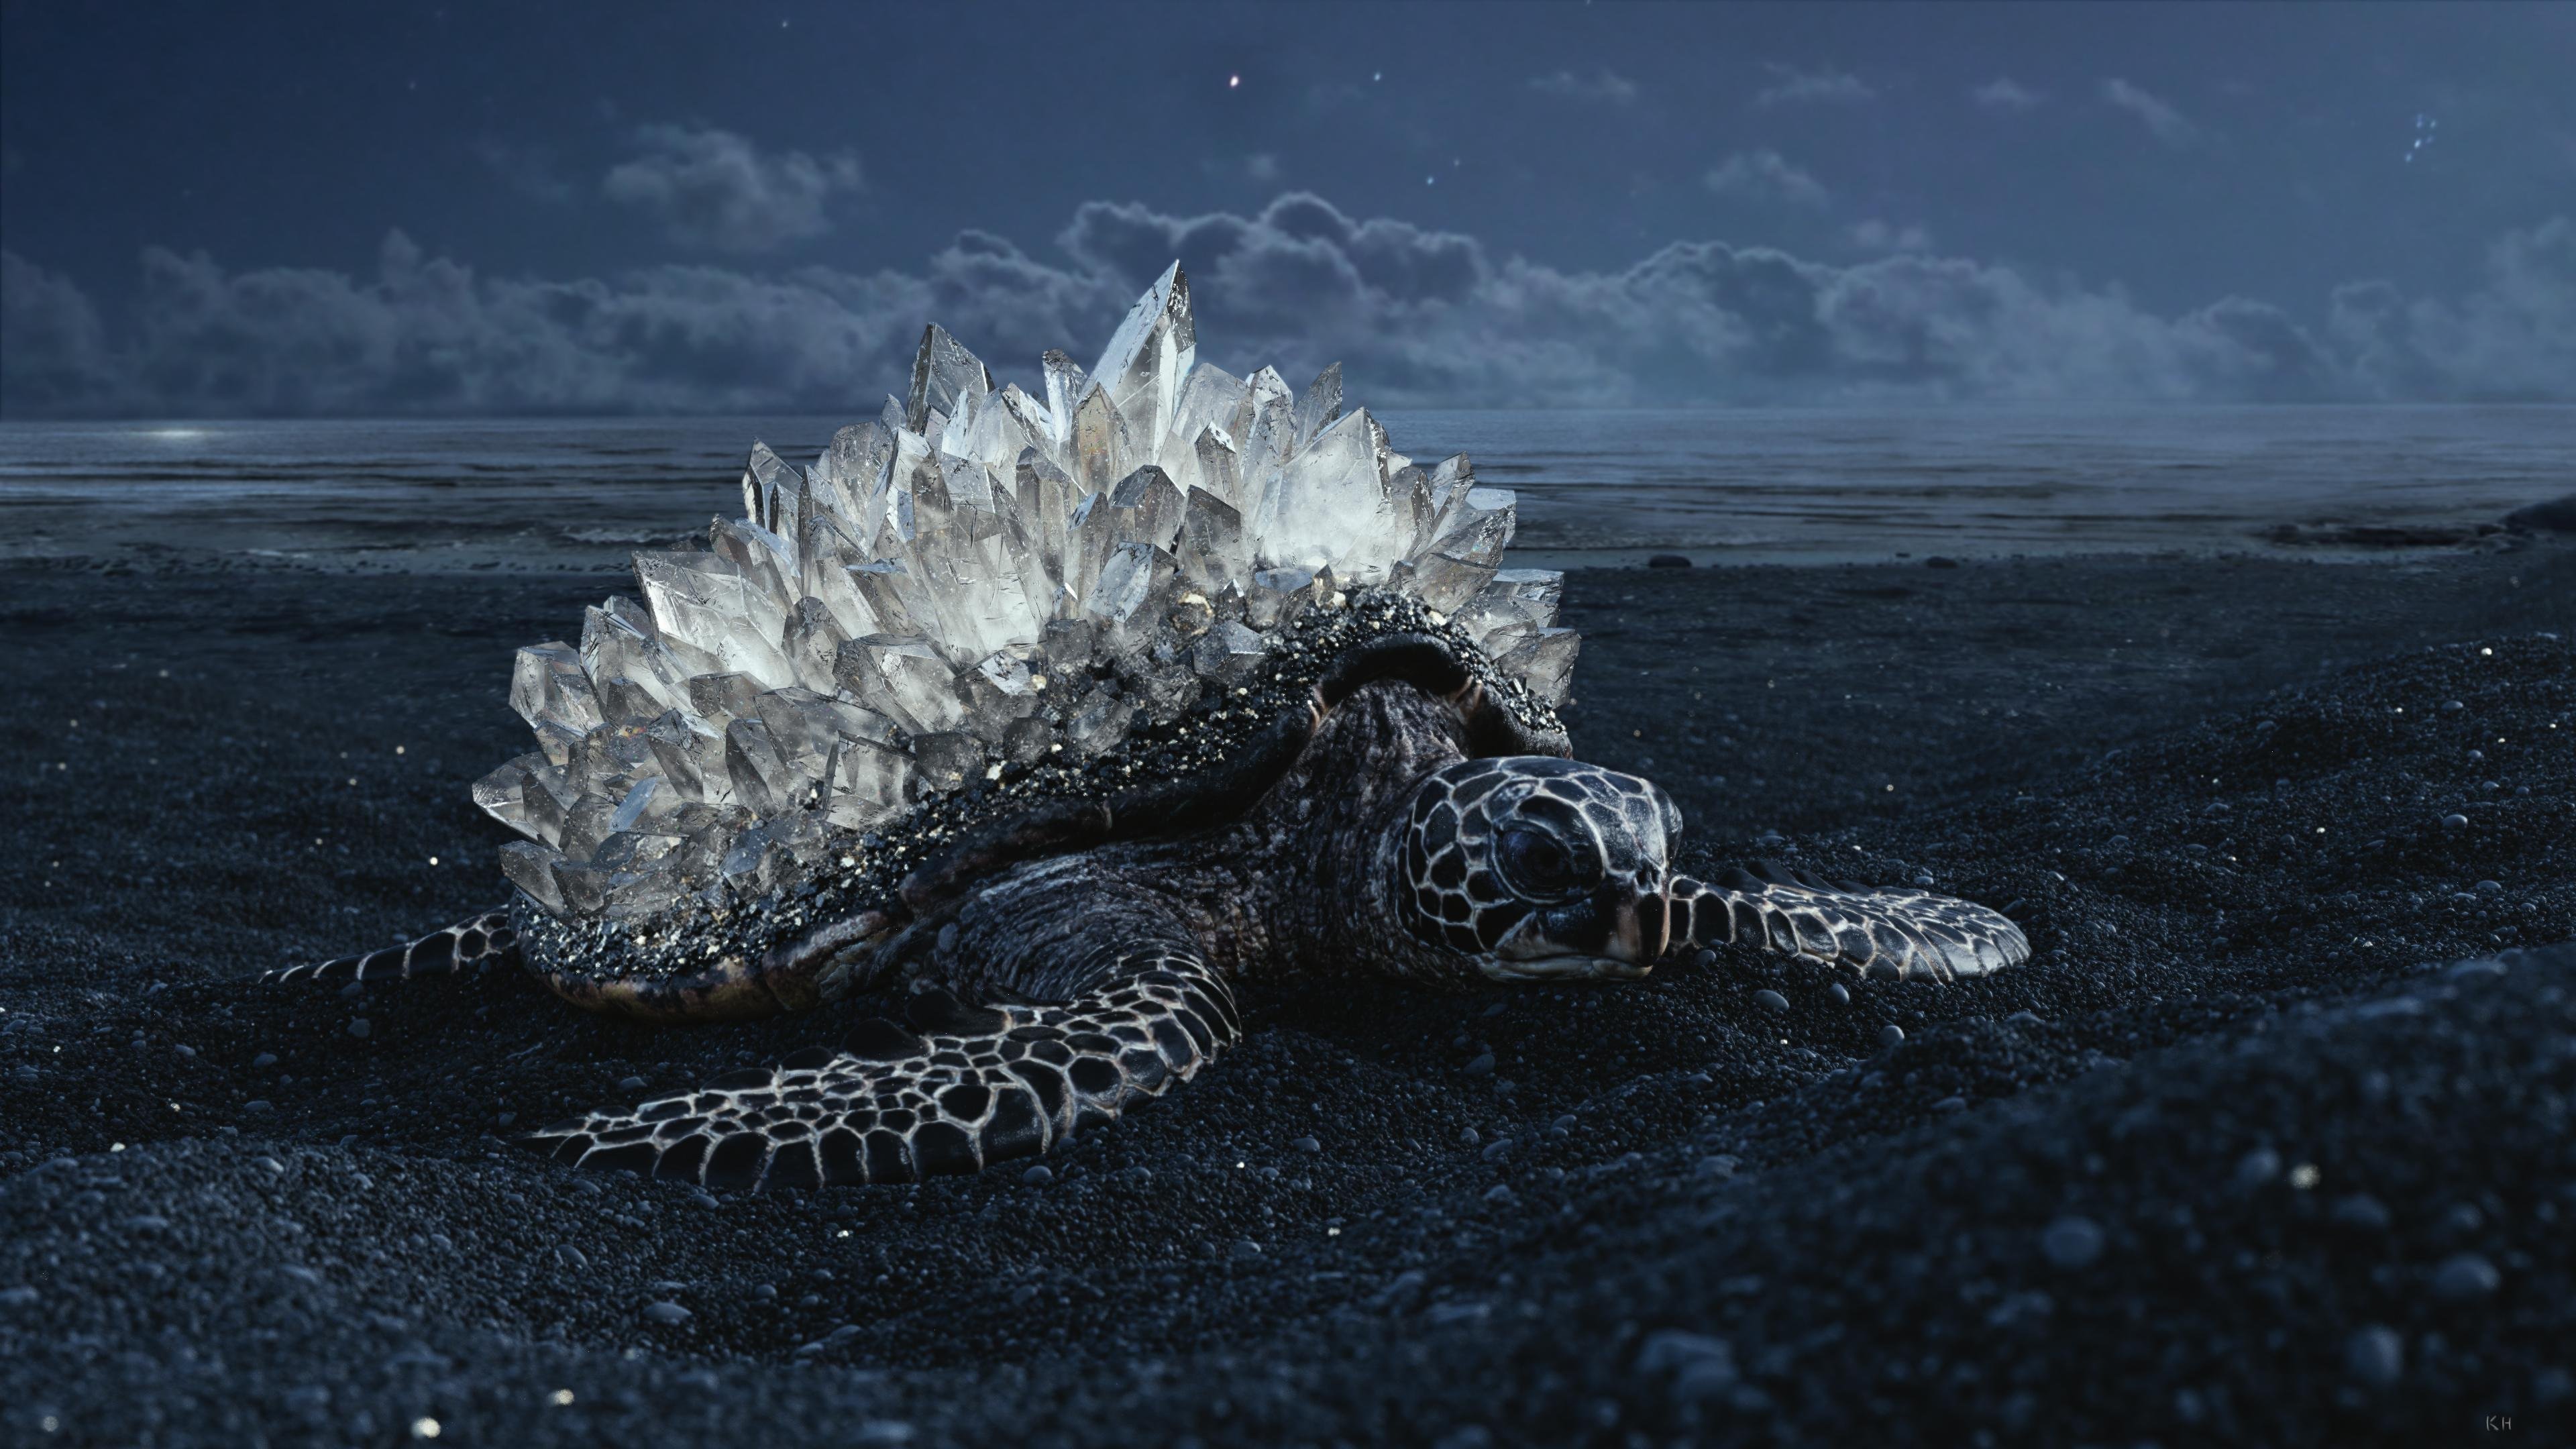 old-rook128: /Imagine Prompt: a giant sea turtle with a island on its back.  4k resolution